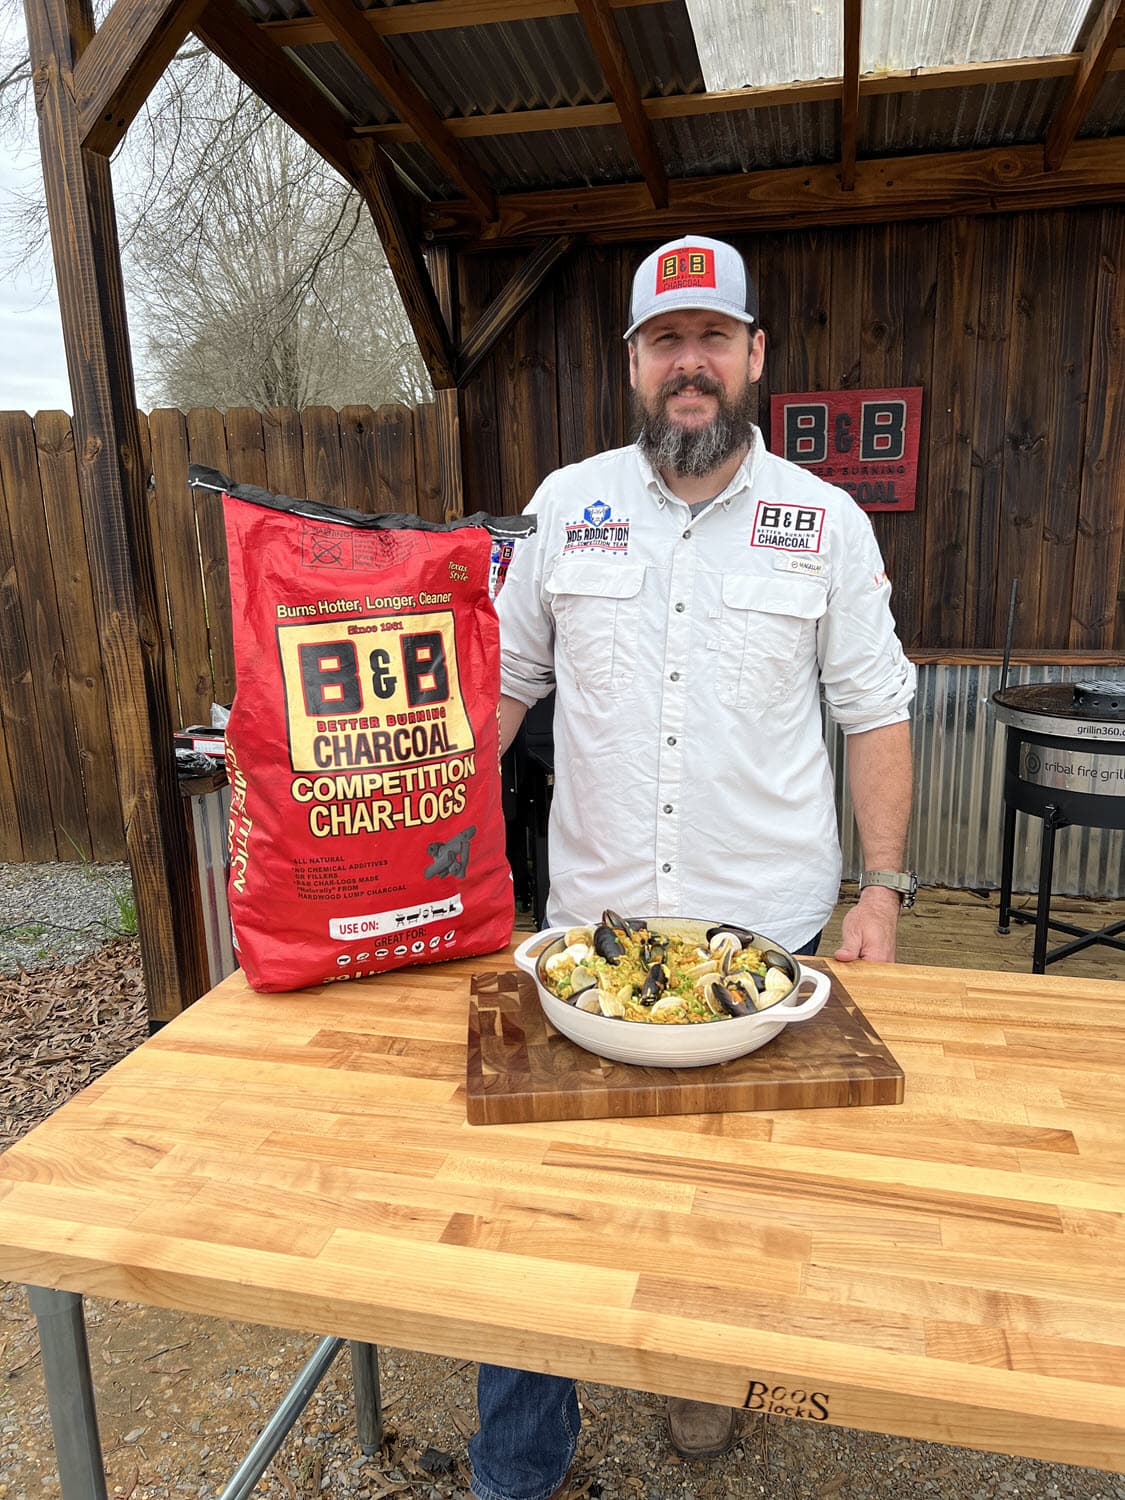 Pitmaster Marcio Borguezan with bag of B&B Competition Char-Logs and grilled seafood paella